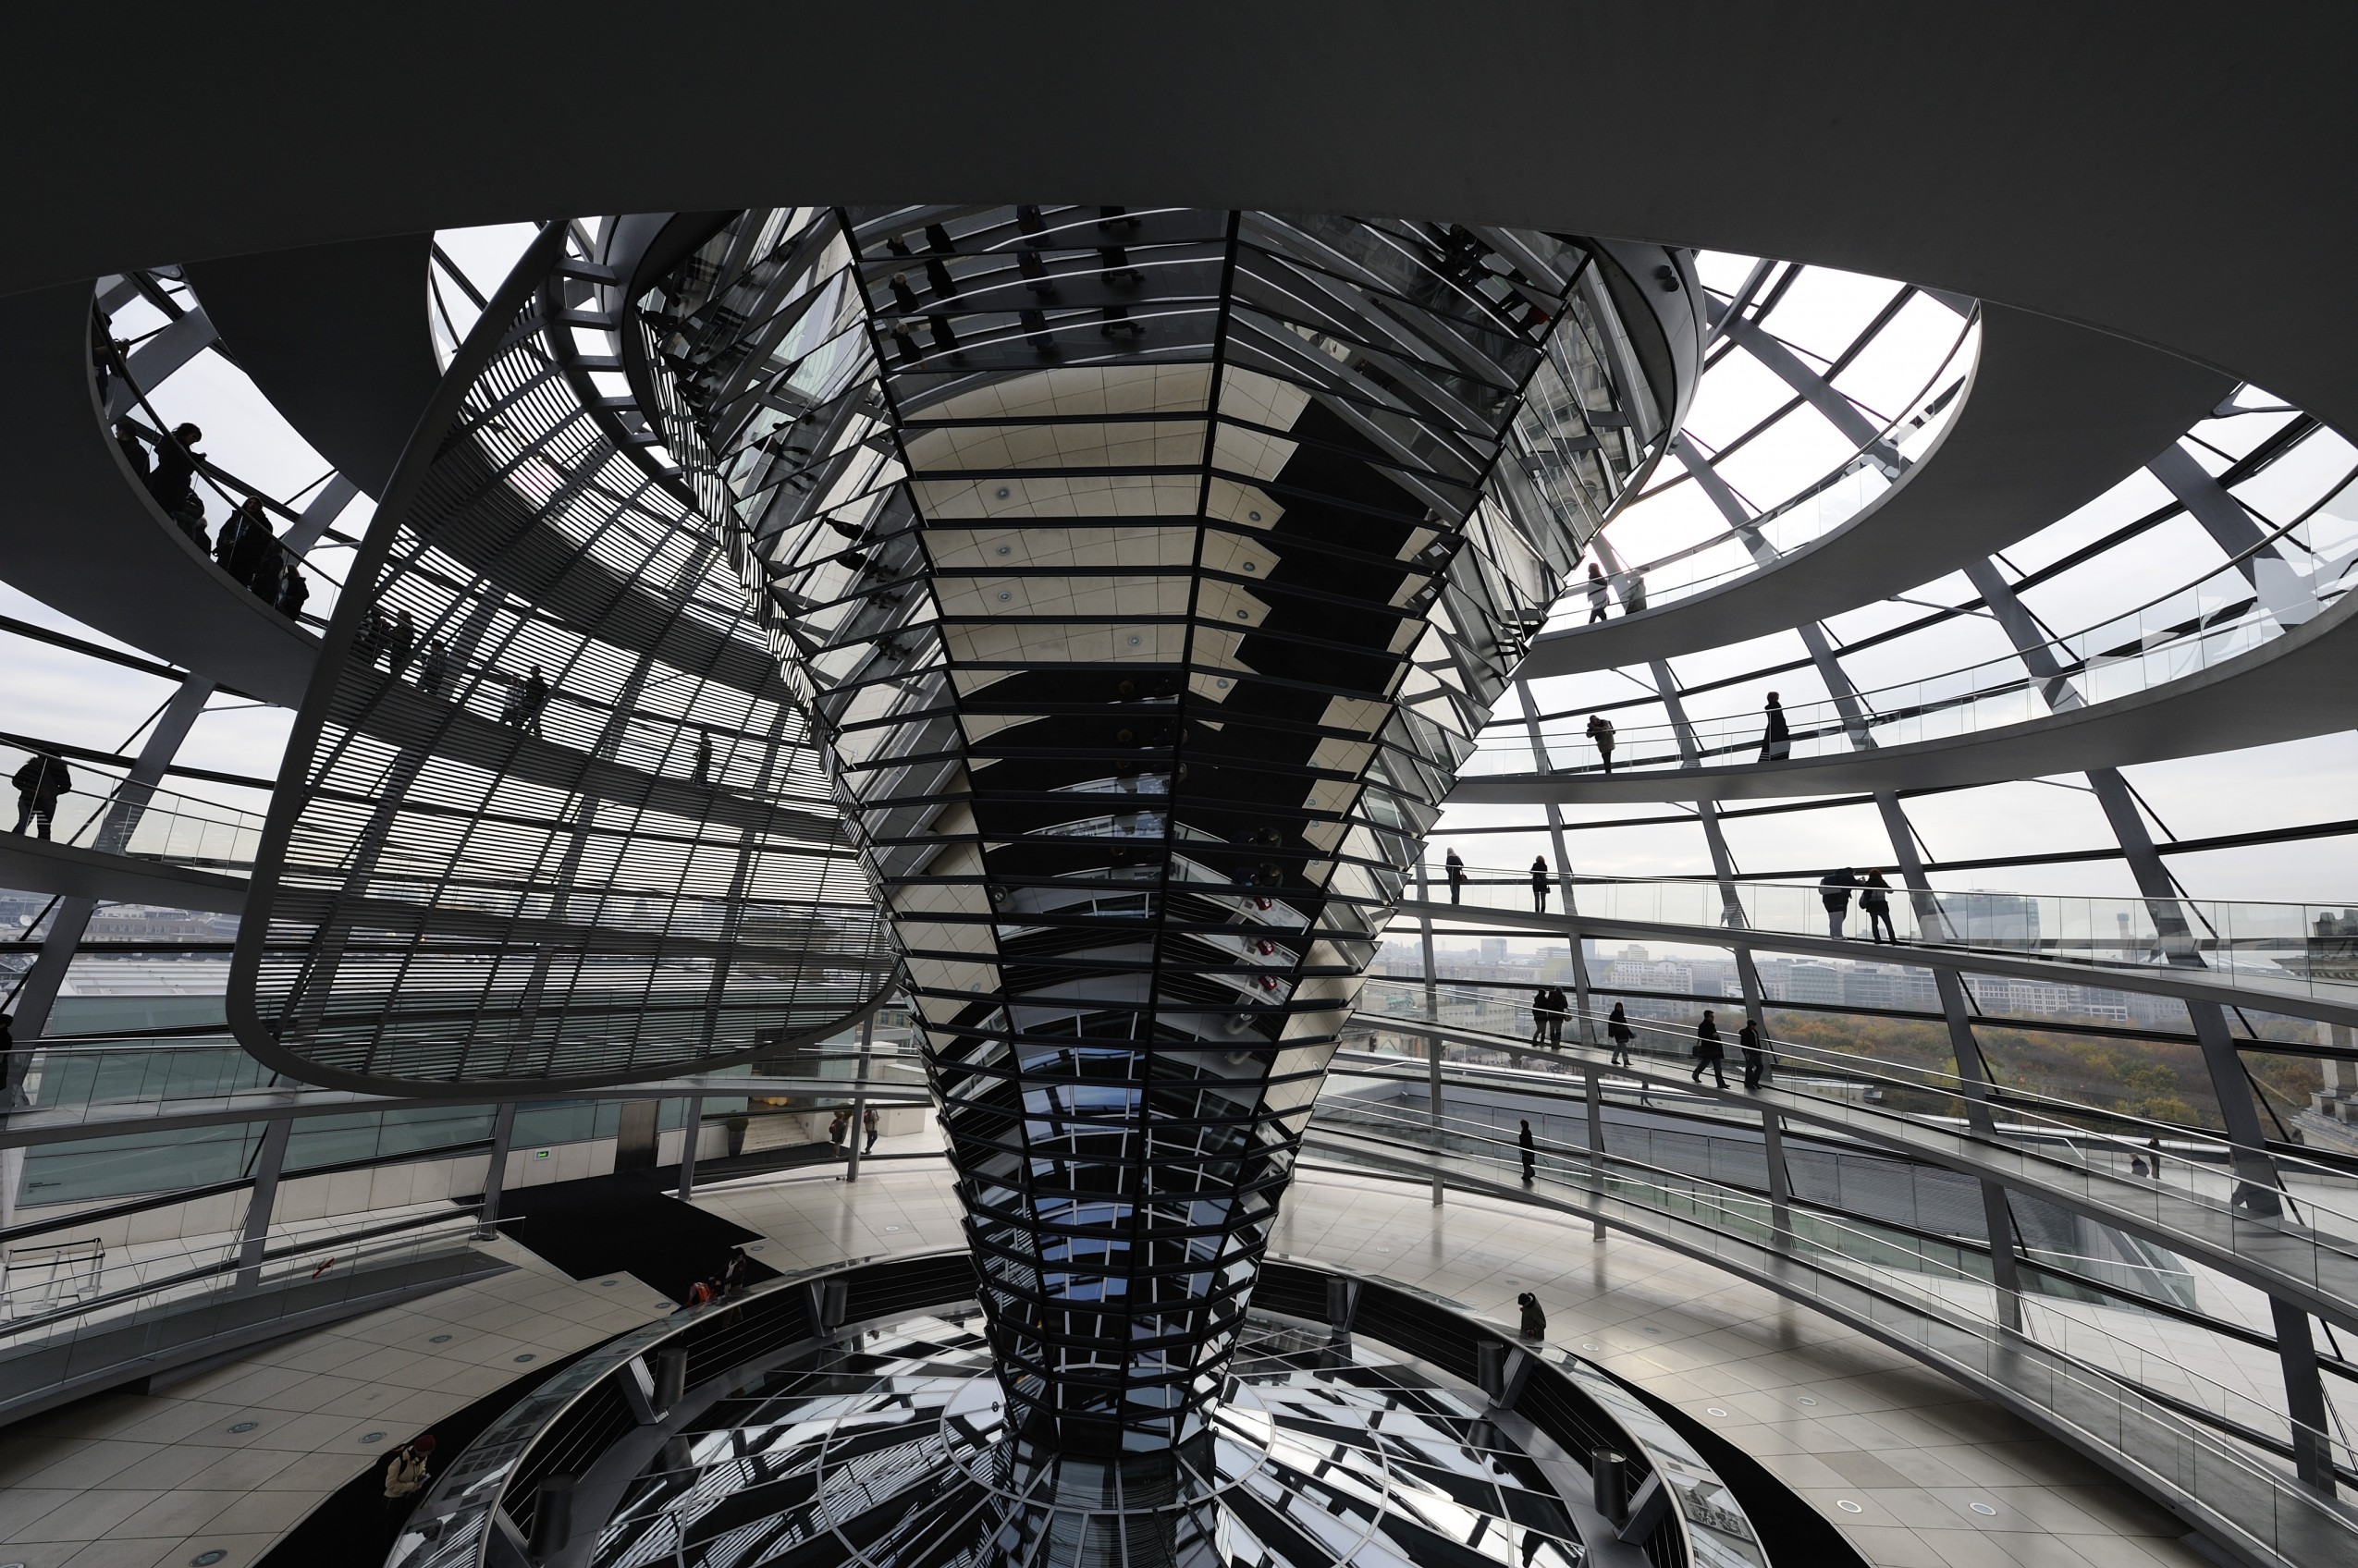 September 2009, Berlin, Germany --- Inside of the glass dome of the Reichstag, designed by architect Norman Foster. --- Image by © Frederic Soltan/Corbis